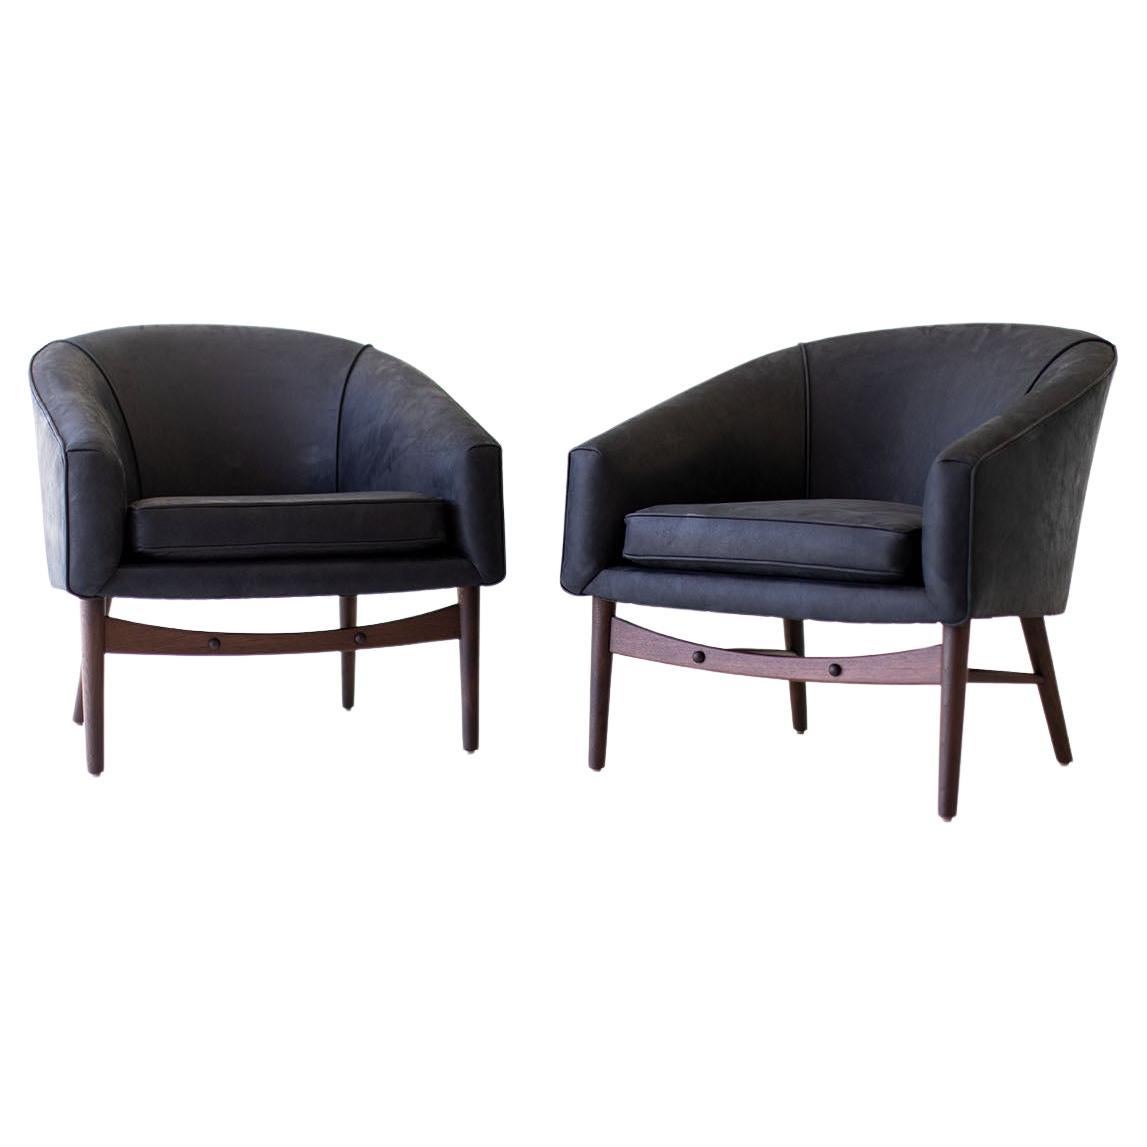 Craft Associates Lounge Chairs, Leather Lounge Chairs, Black Leather and Walnut